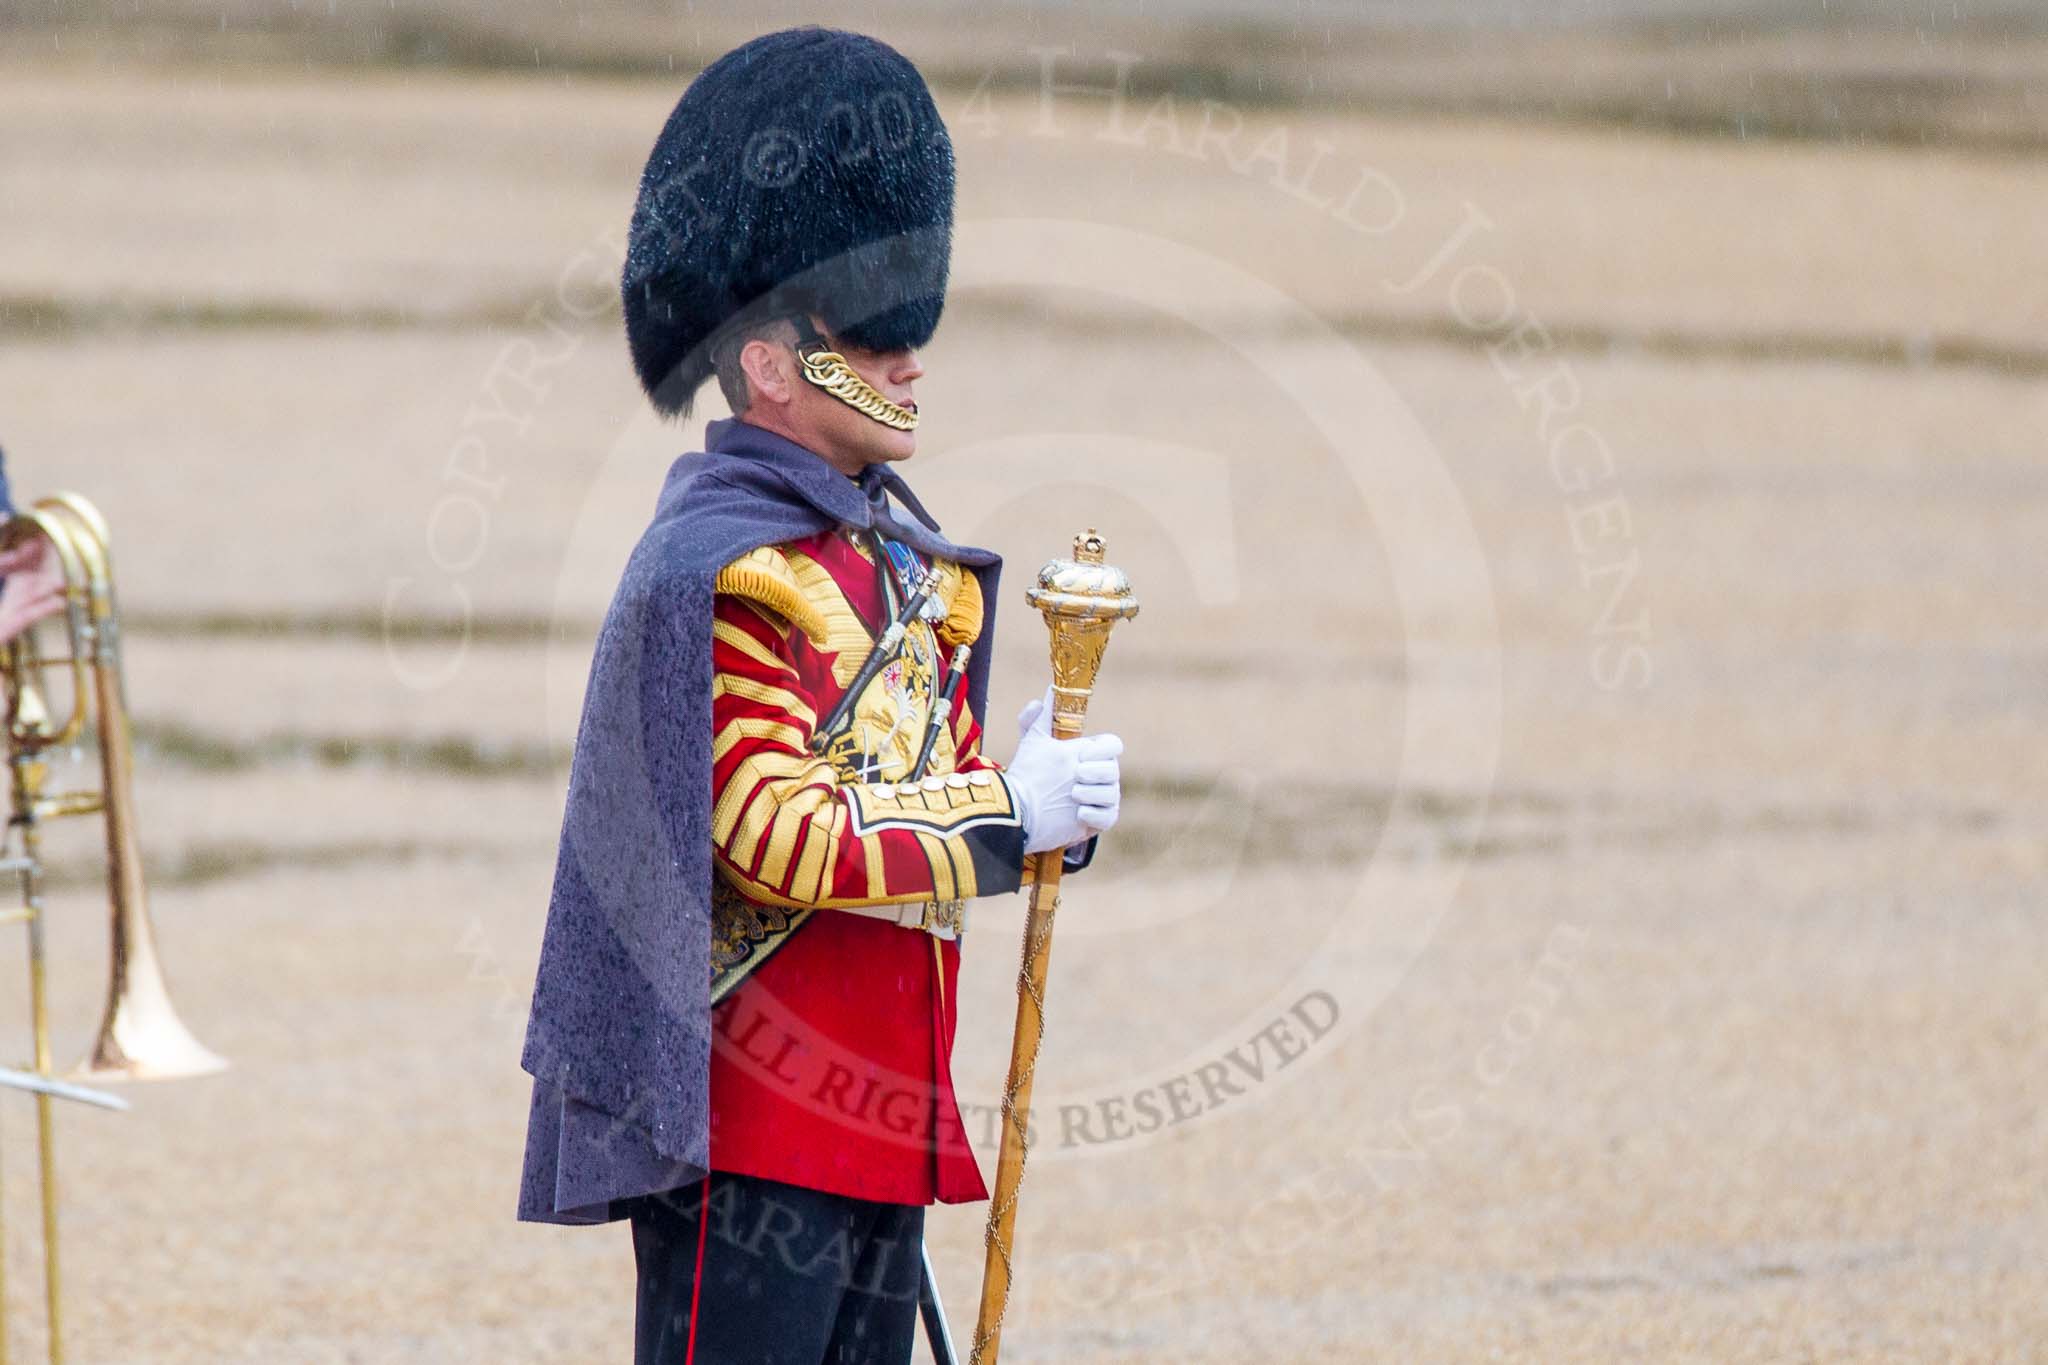 The Colonel's Review 2014.
Horse Guards Parade, Westminster,
London,

United Kingdom,
on 07 June 2014 at 10:23, image #108